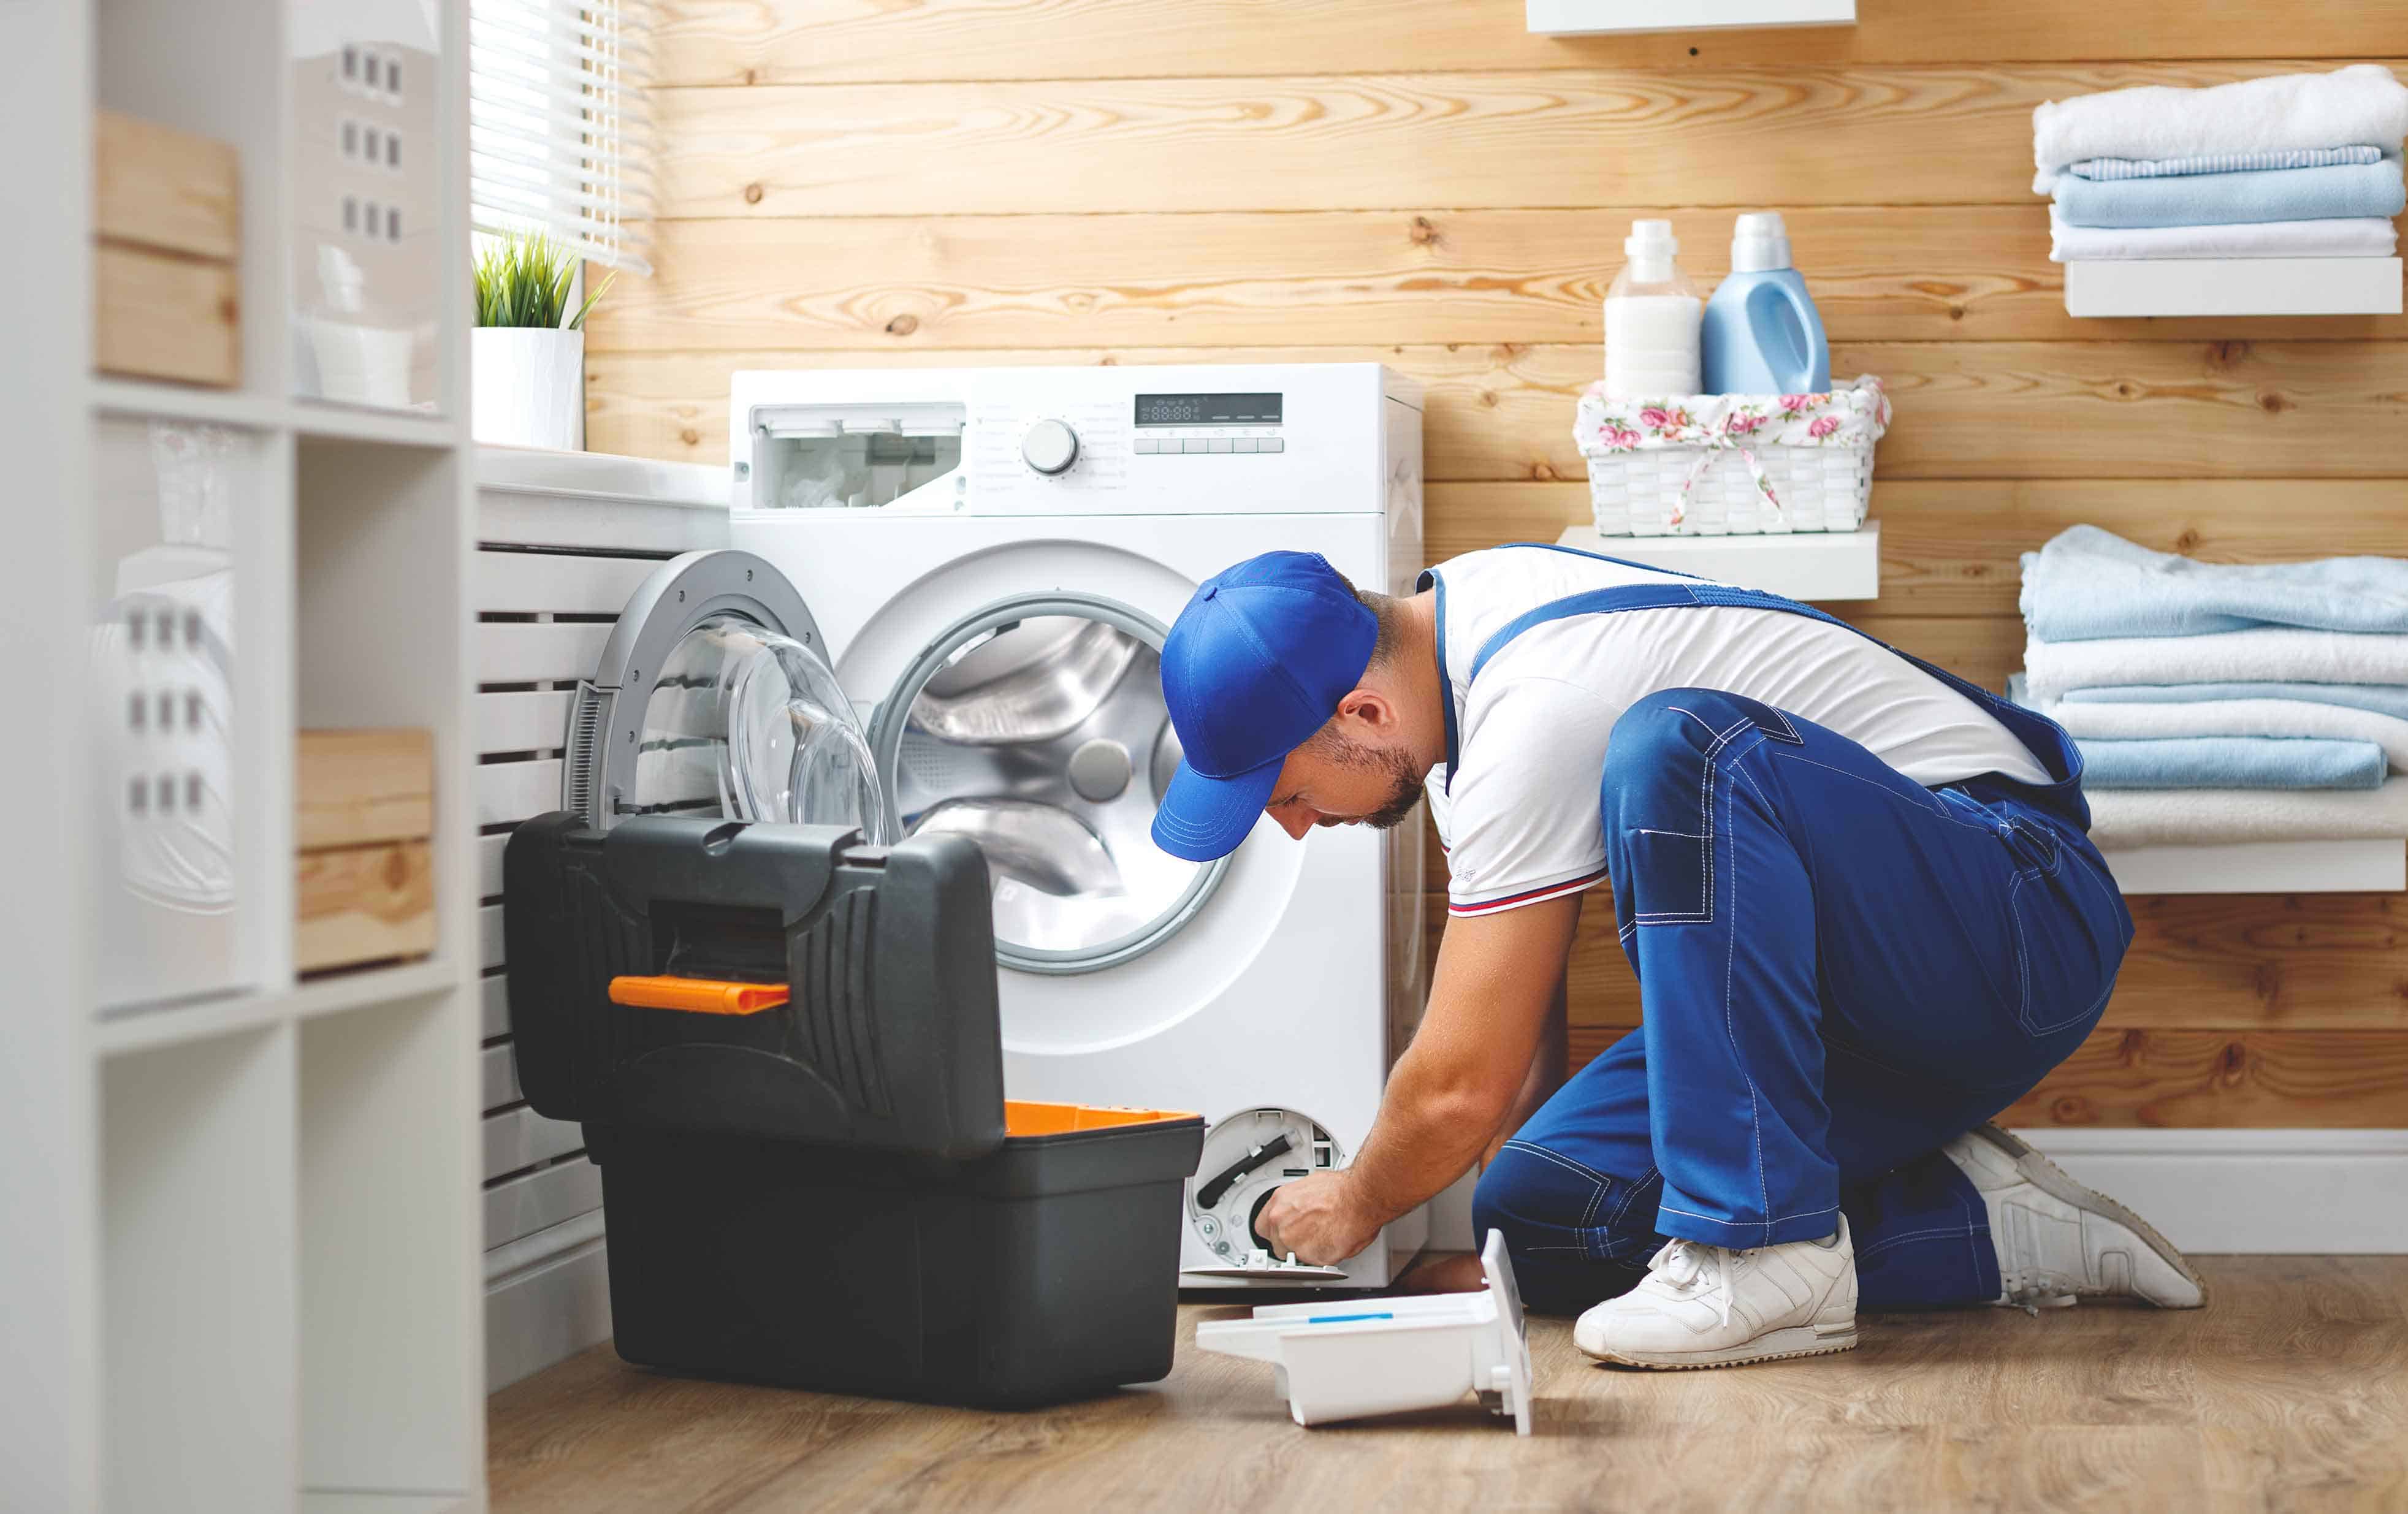 How to choose a good appliance repair service